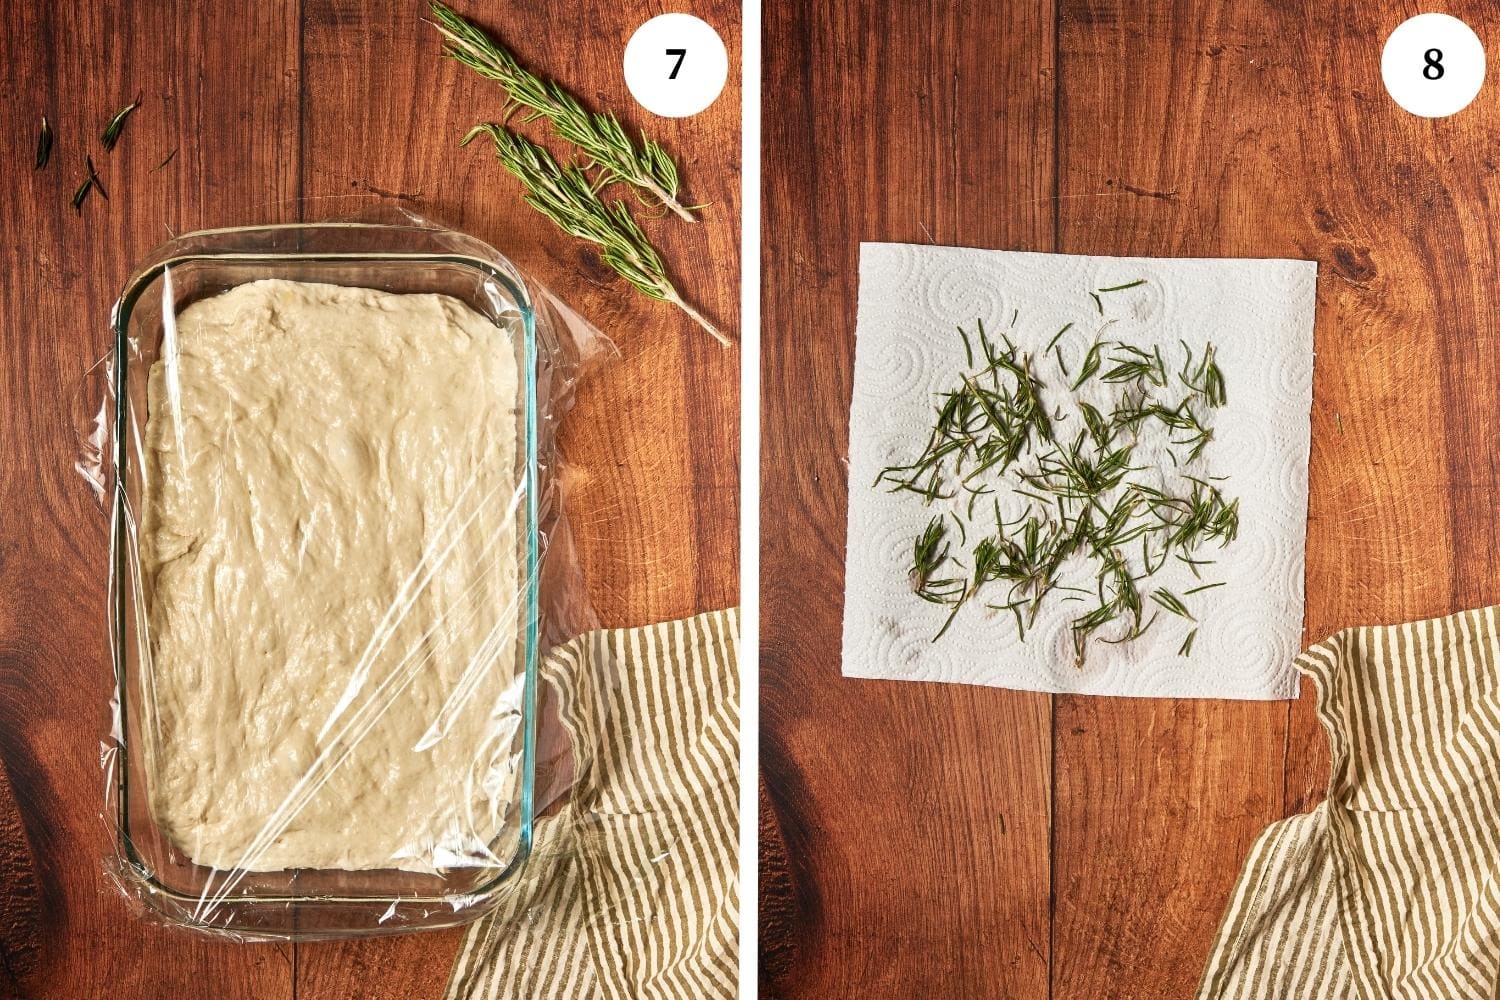 focaccia bread procedure: dough in a pan covered with plastic wrap. next photo is rosemary leaves on a paper towel.